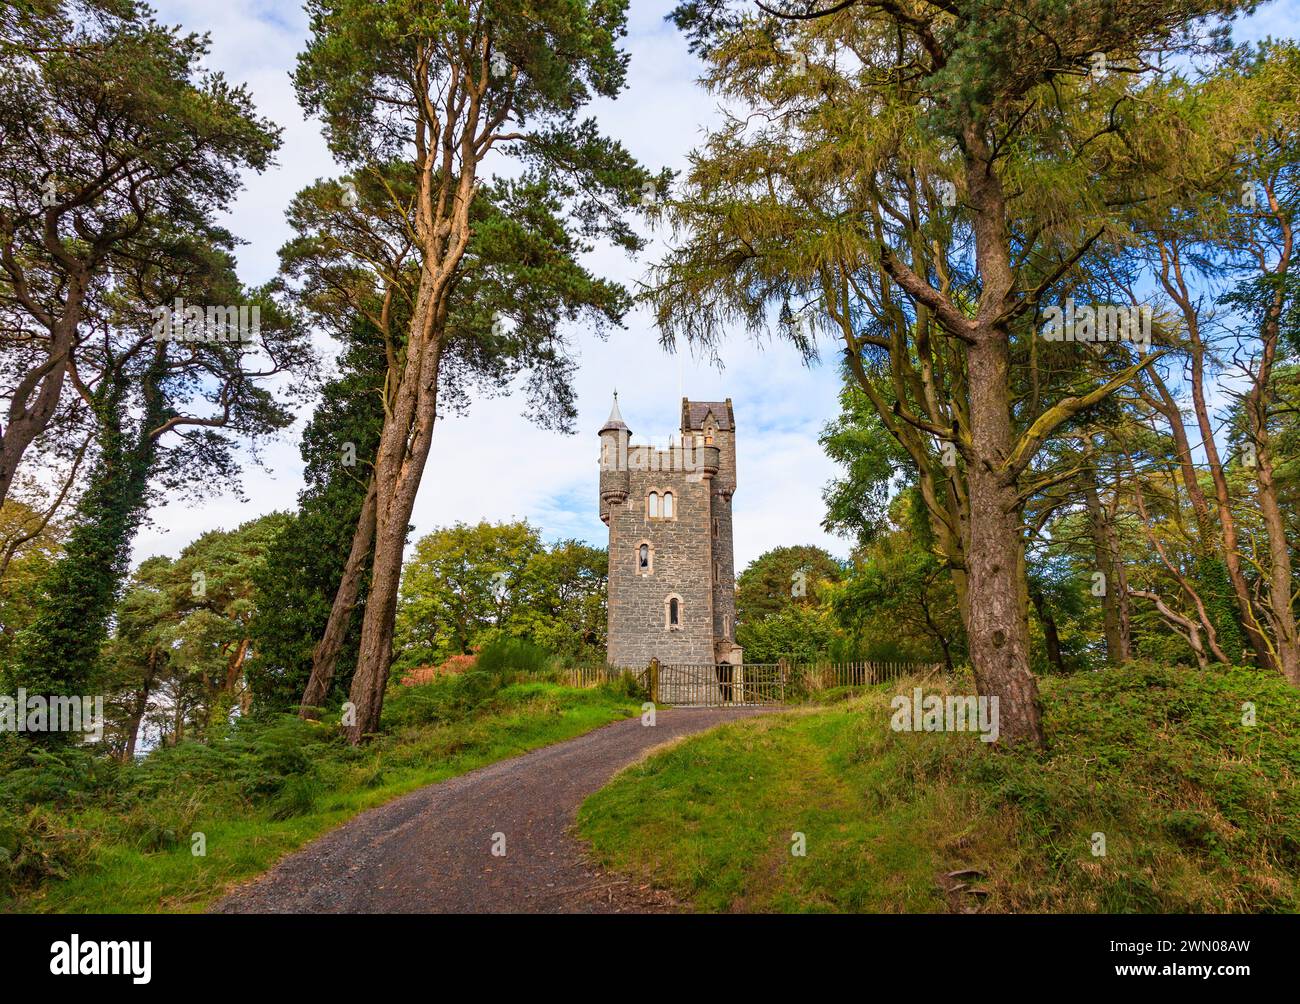 Helen's Tower is a 19th-century folly on the Clandeboye Estate in Bangor, County Down, Northern Ireland. Designed by Scottish architect William Burn a Stock Photo